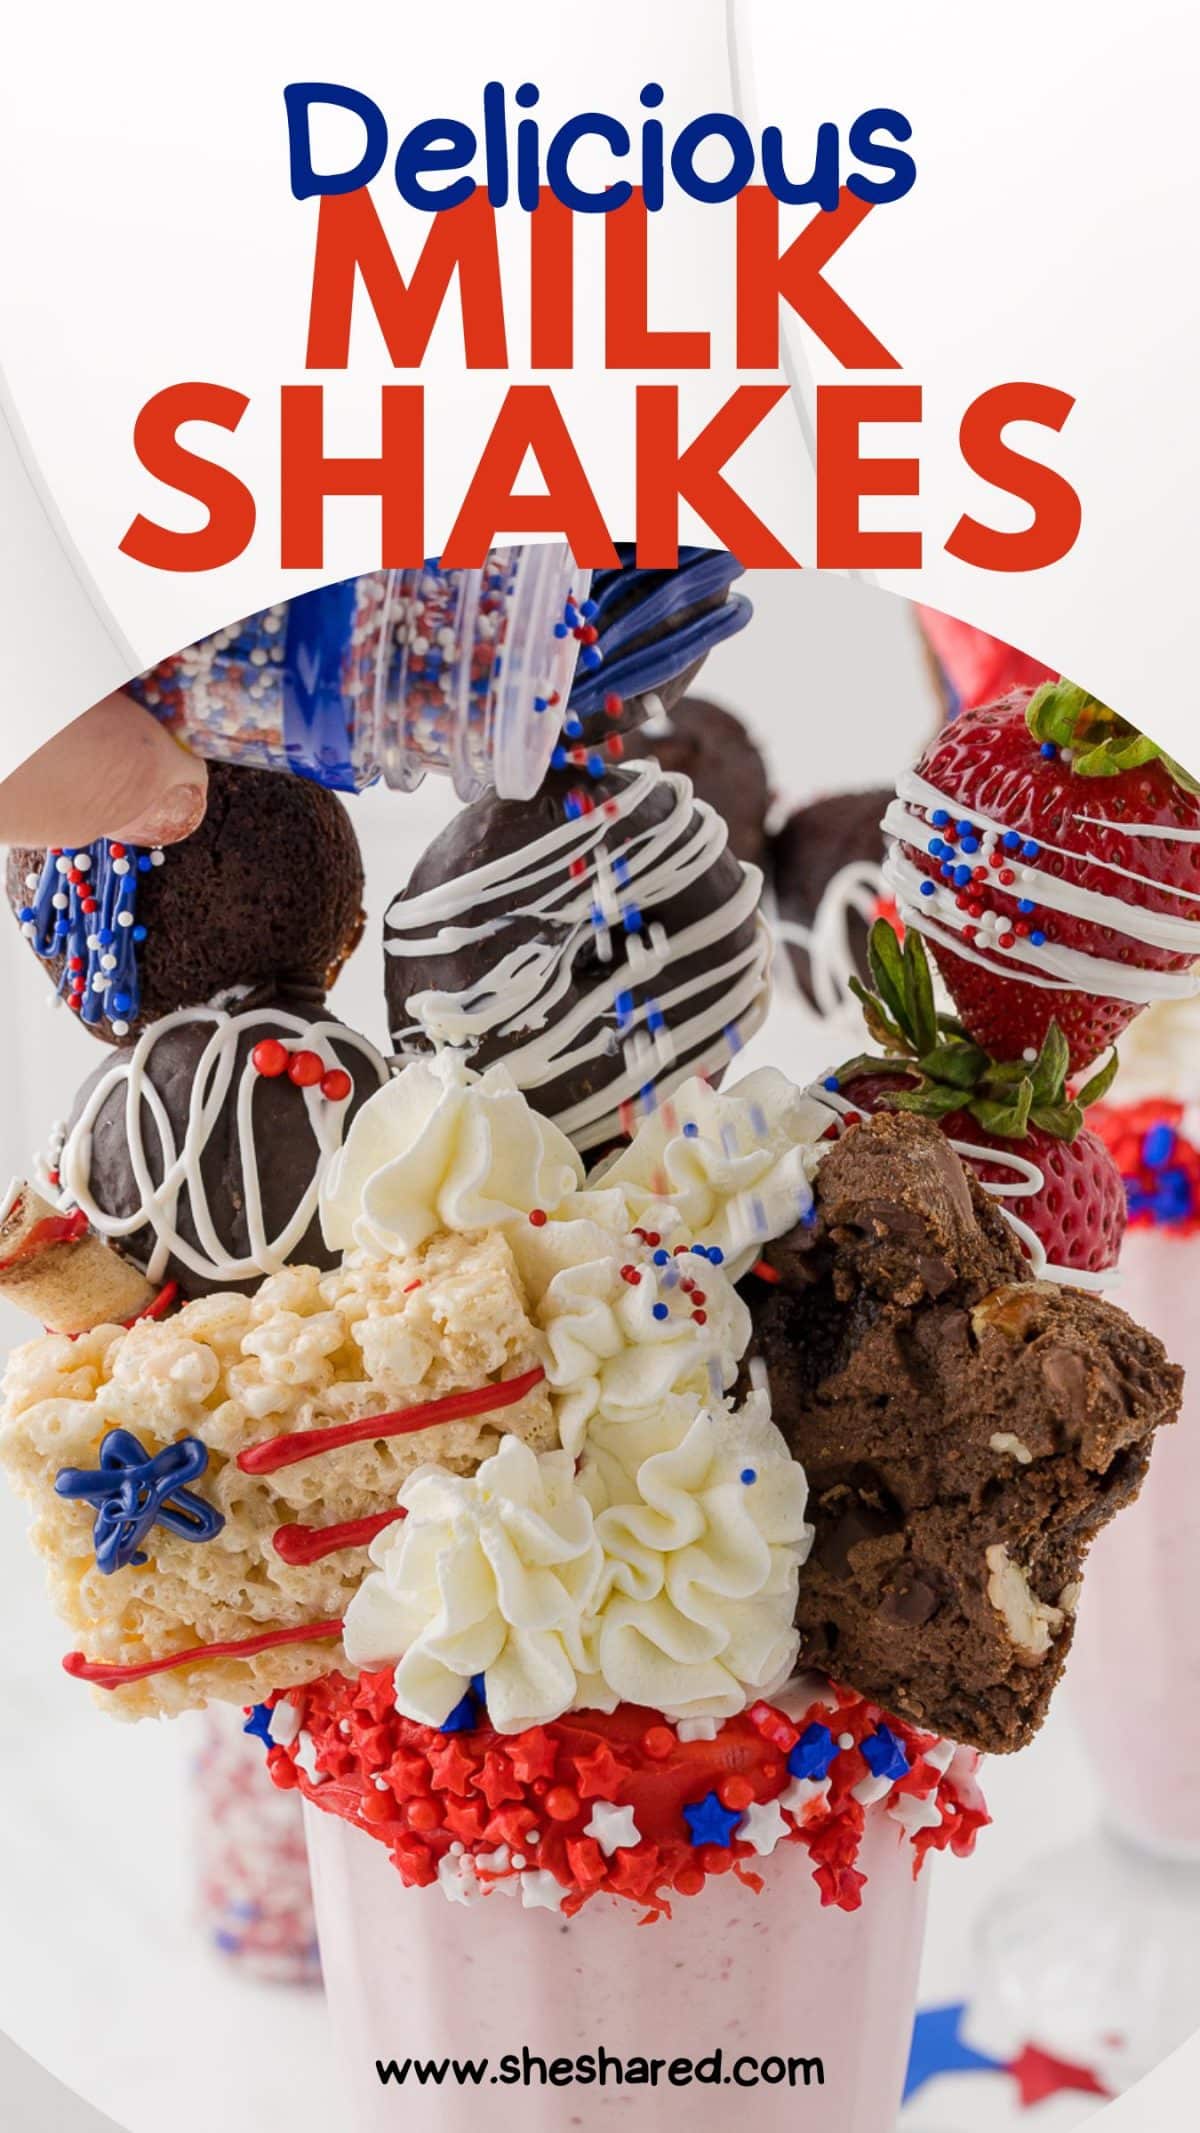 pinterest image of two strawberry shakes with patriotic themed cookies stacked on top and Delicious Milk Shakes across the top.